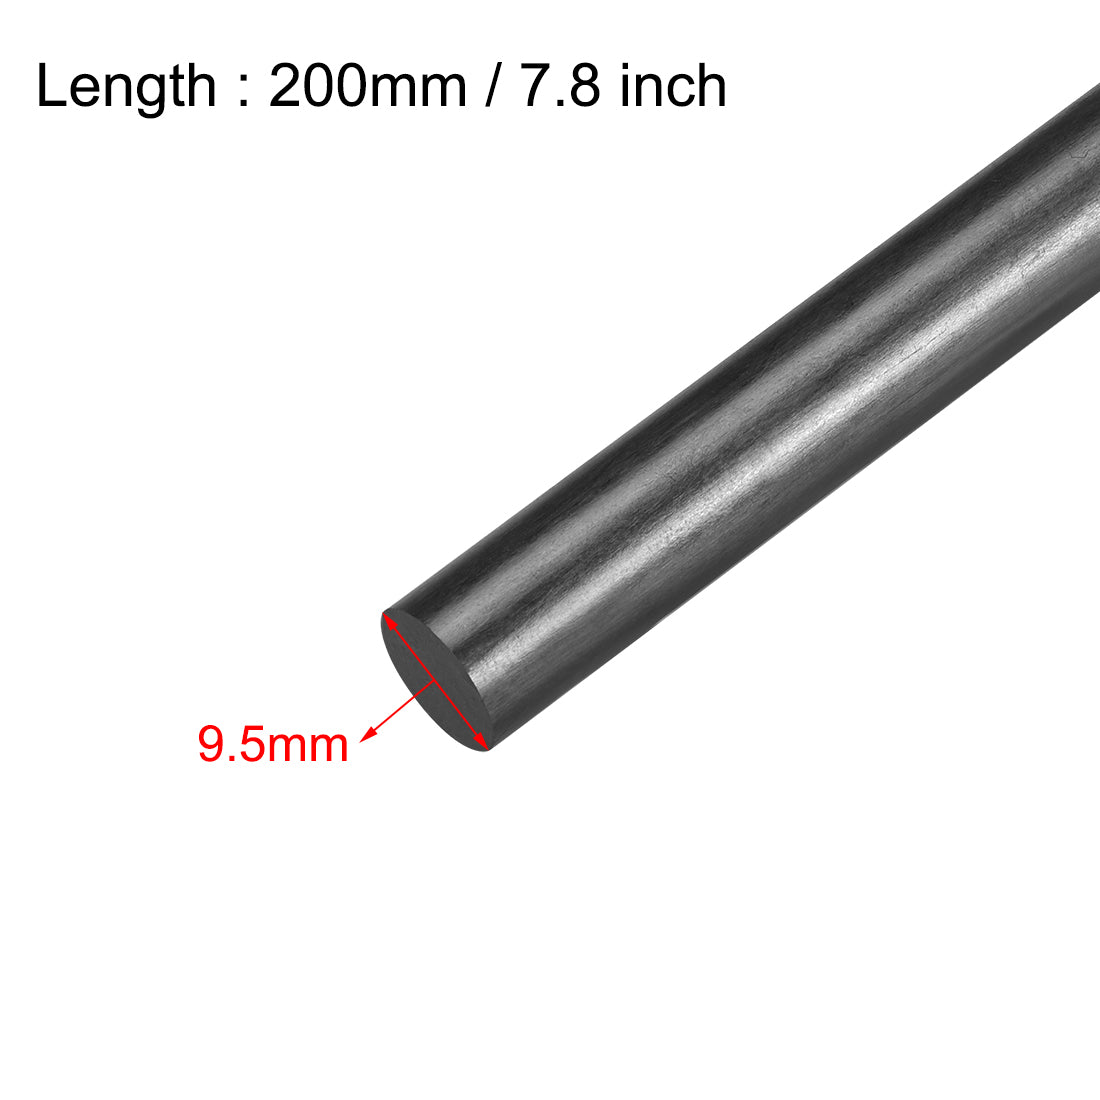 Uxcell Uxcell 9.5mm Carbon Fiber Rod For RC Airplane Matte Pole US, 200mm 7.8 inch, 2pcs